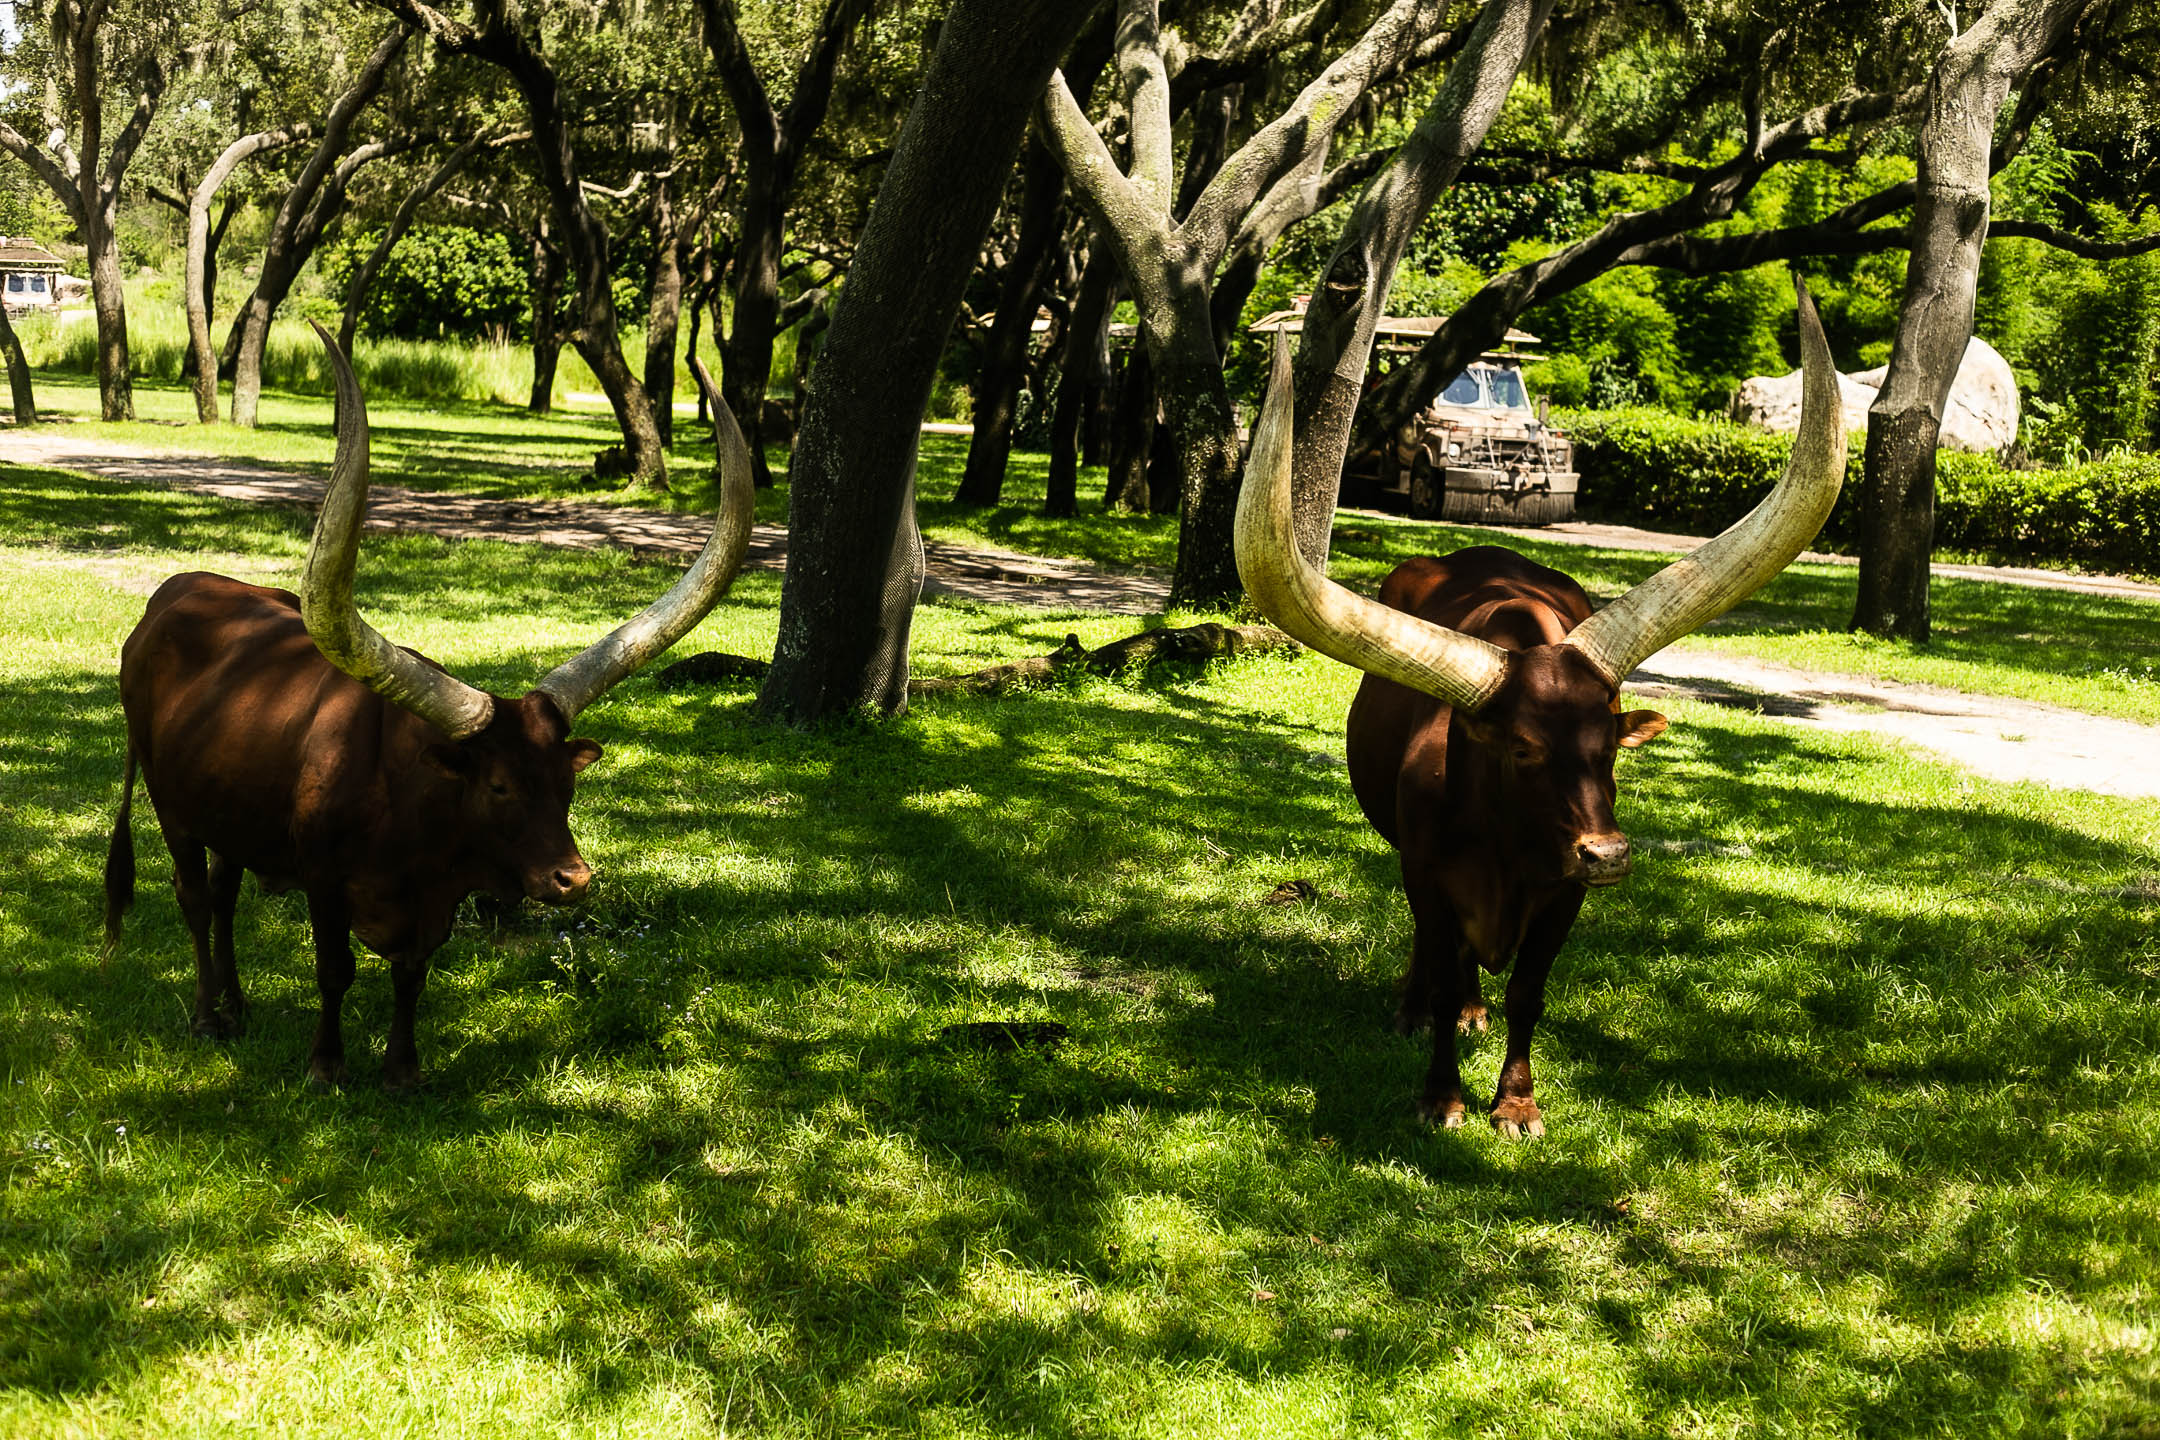 Two cattle with large long horns stand near each other in a wooded area. Sunlight falls through the leaves on the tree branches and the cattle horns, making them almost the same color. A sidewalk cuts through the wood in the background, and a maintenance vehicle can be seen beside shrubs.